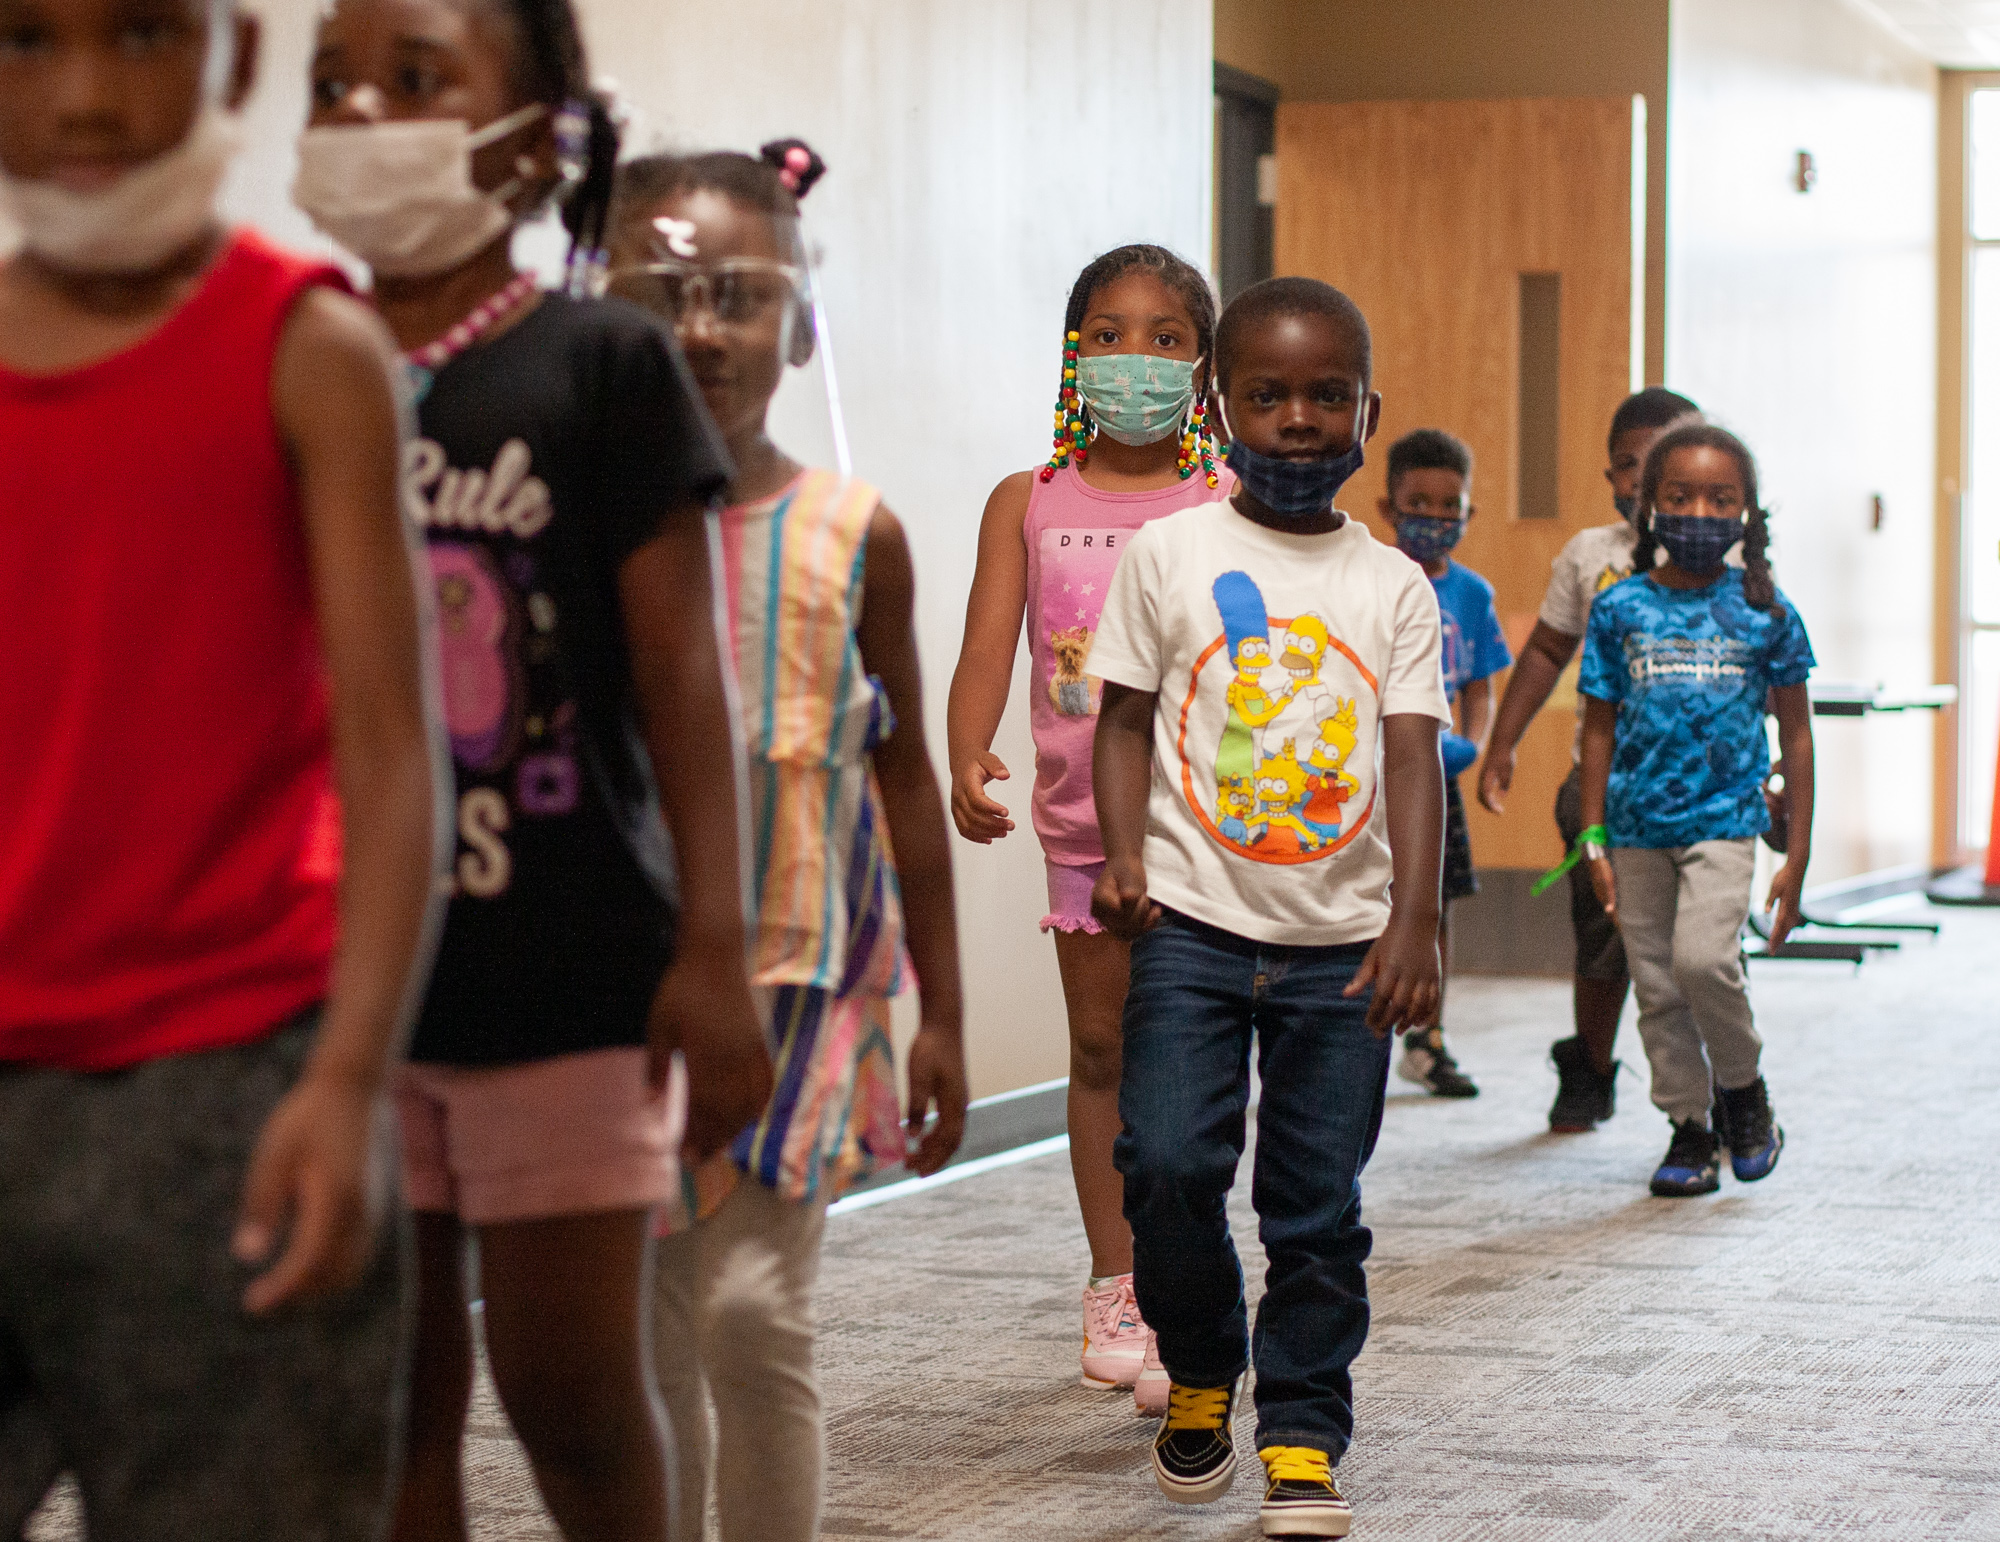 Eight kids, all wearing masks or face shields, walk in a jumbled line through a carpeted school hallway